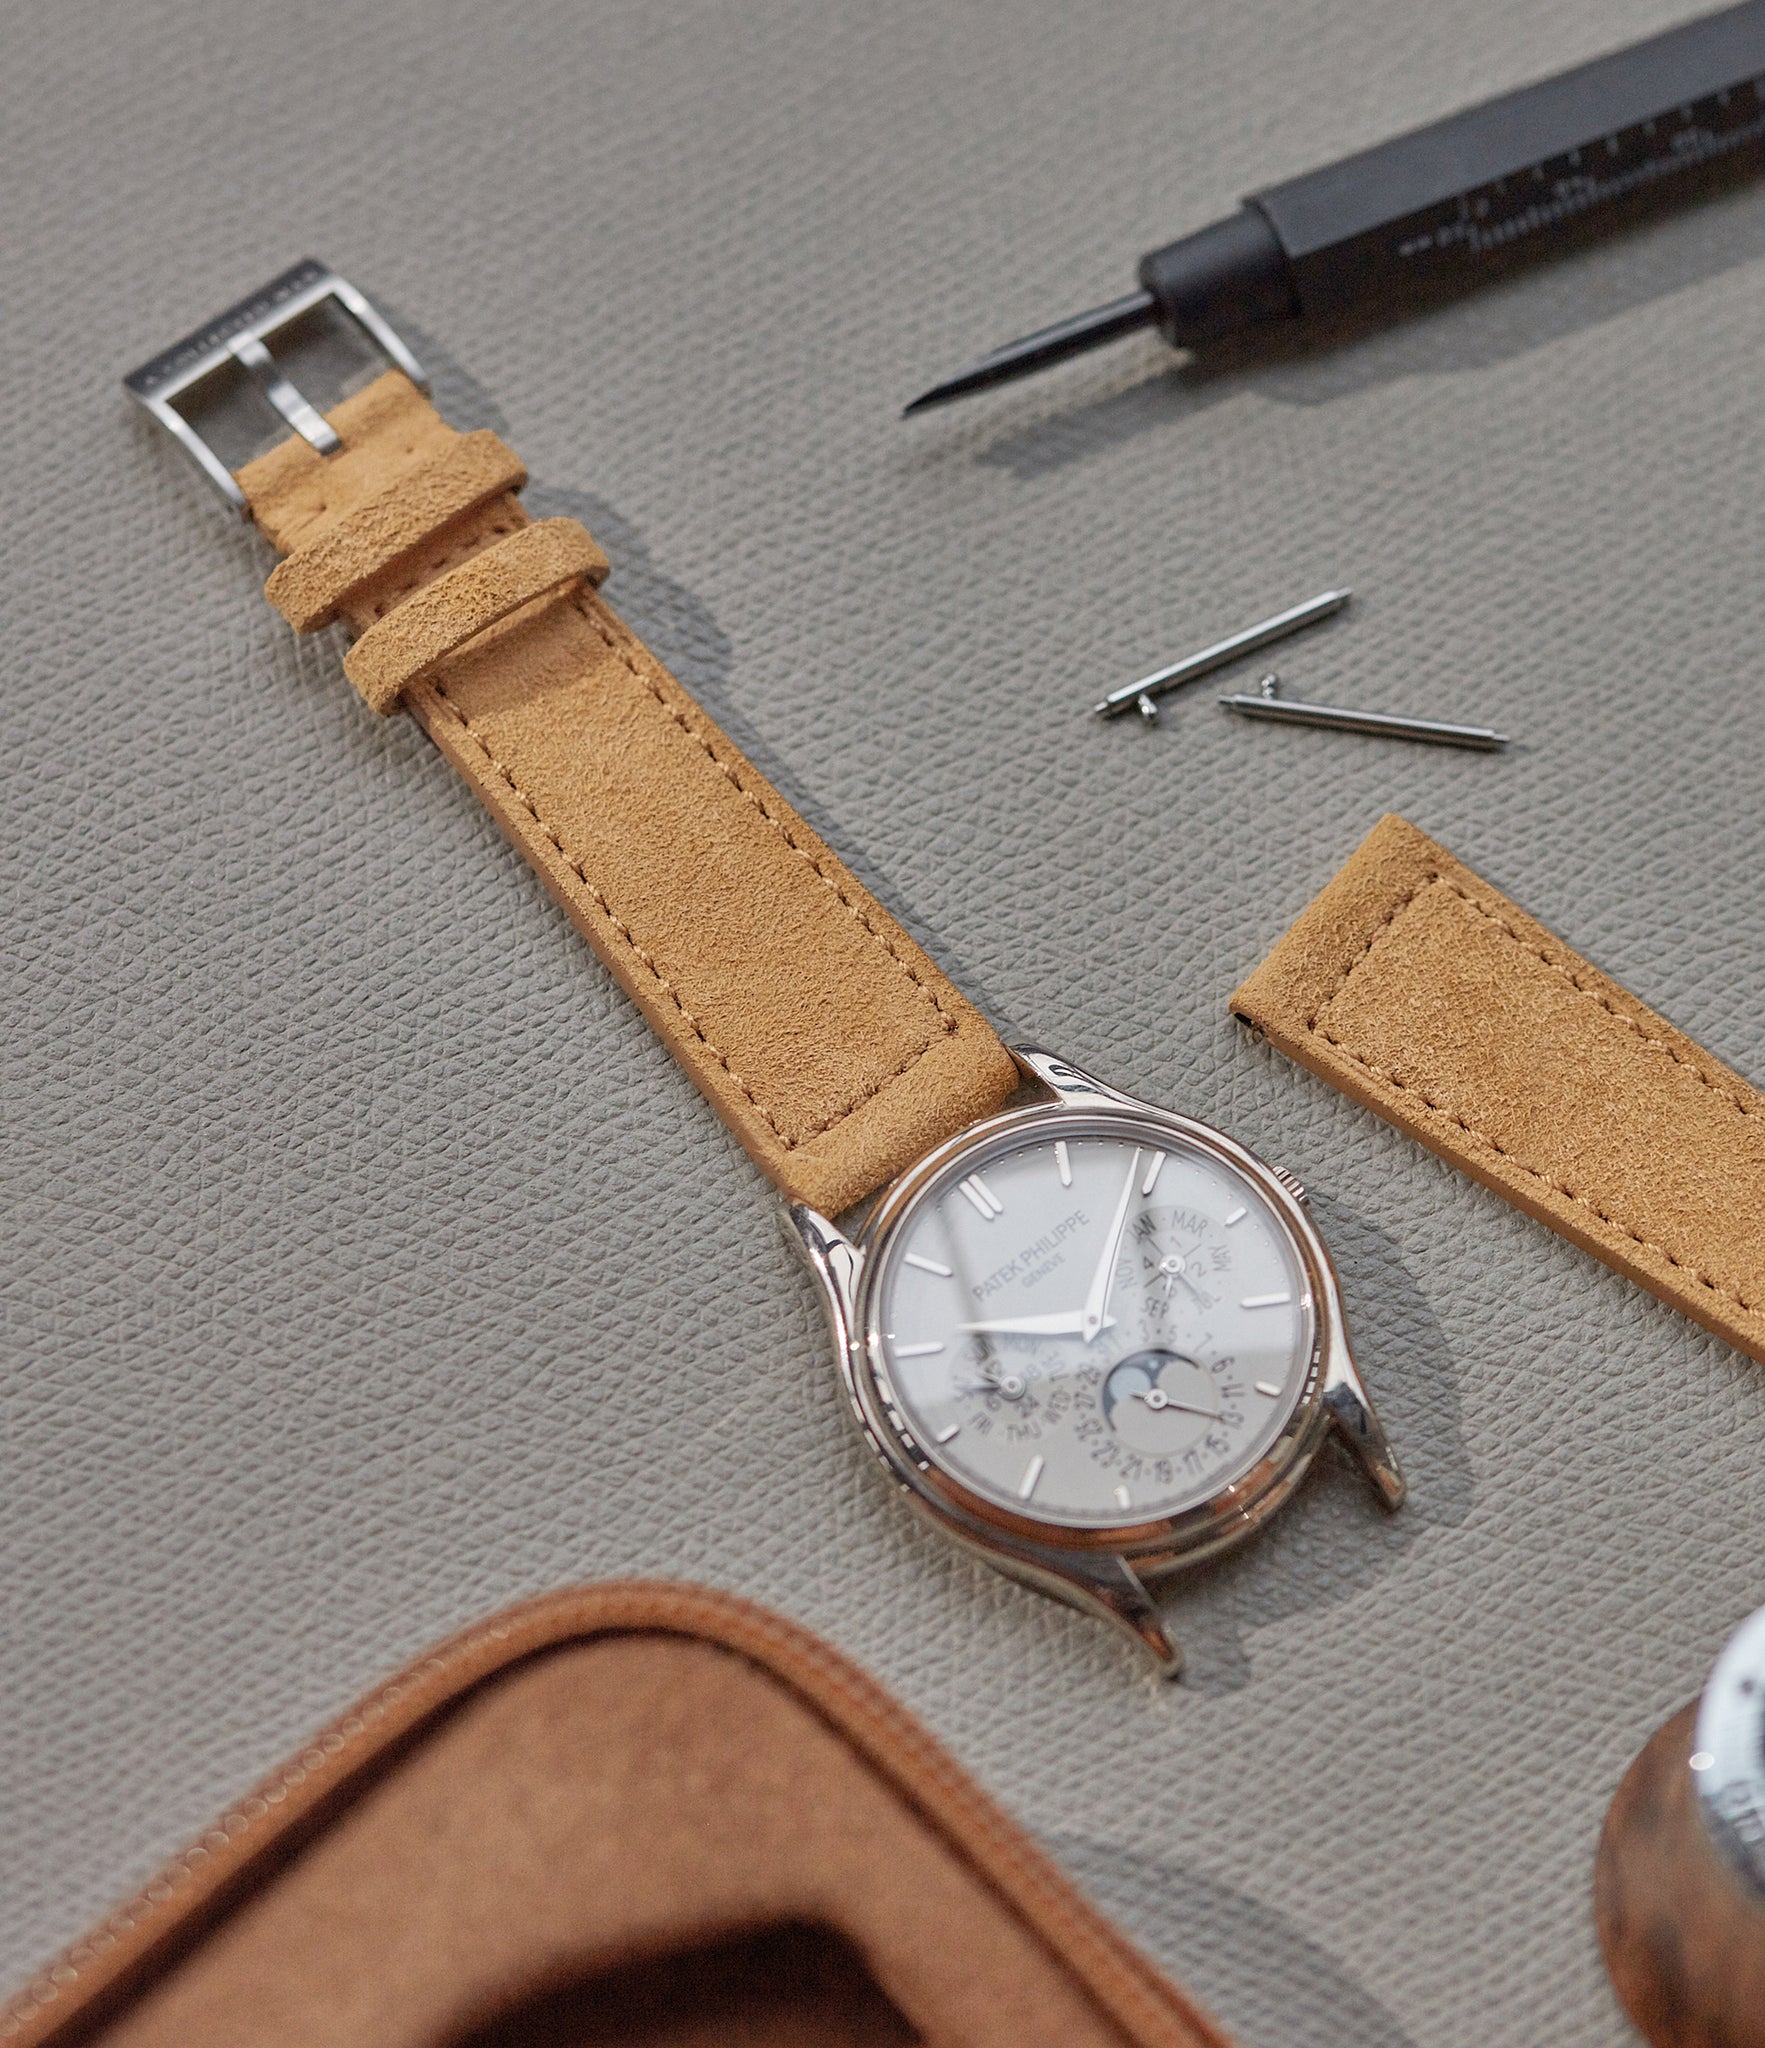 Selling Granada Molequin watch strap Patek Philippe honey light tan suede leather quick-release springbars buckle handcrafted European-made for sale online at A Collected Man London